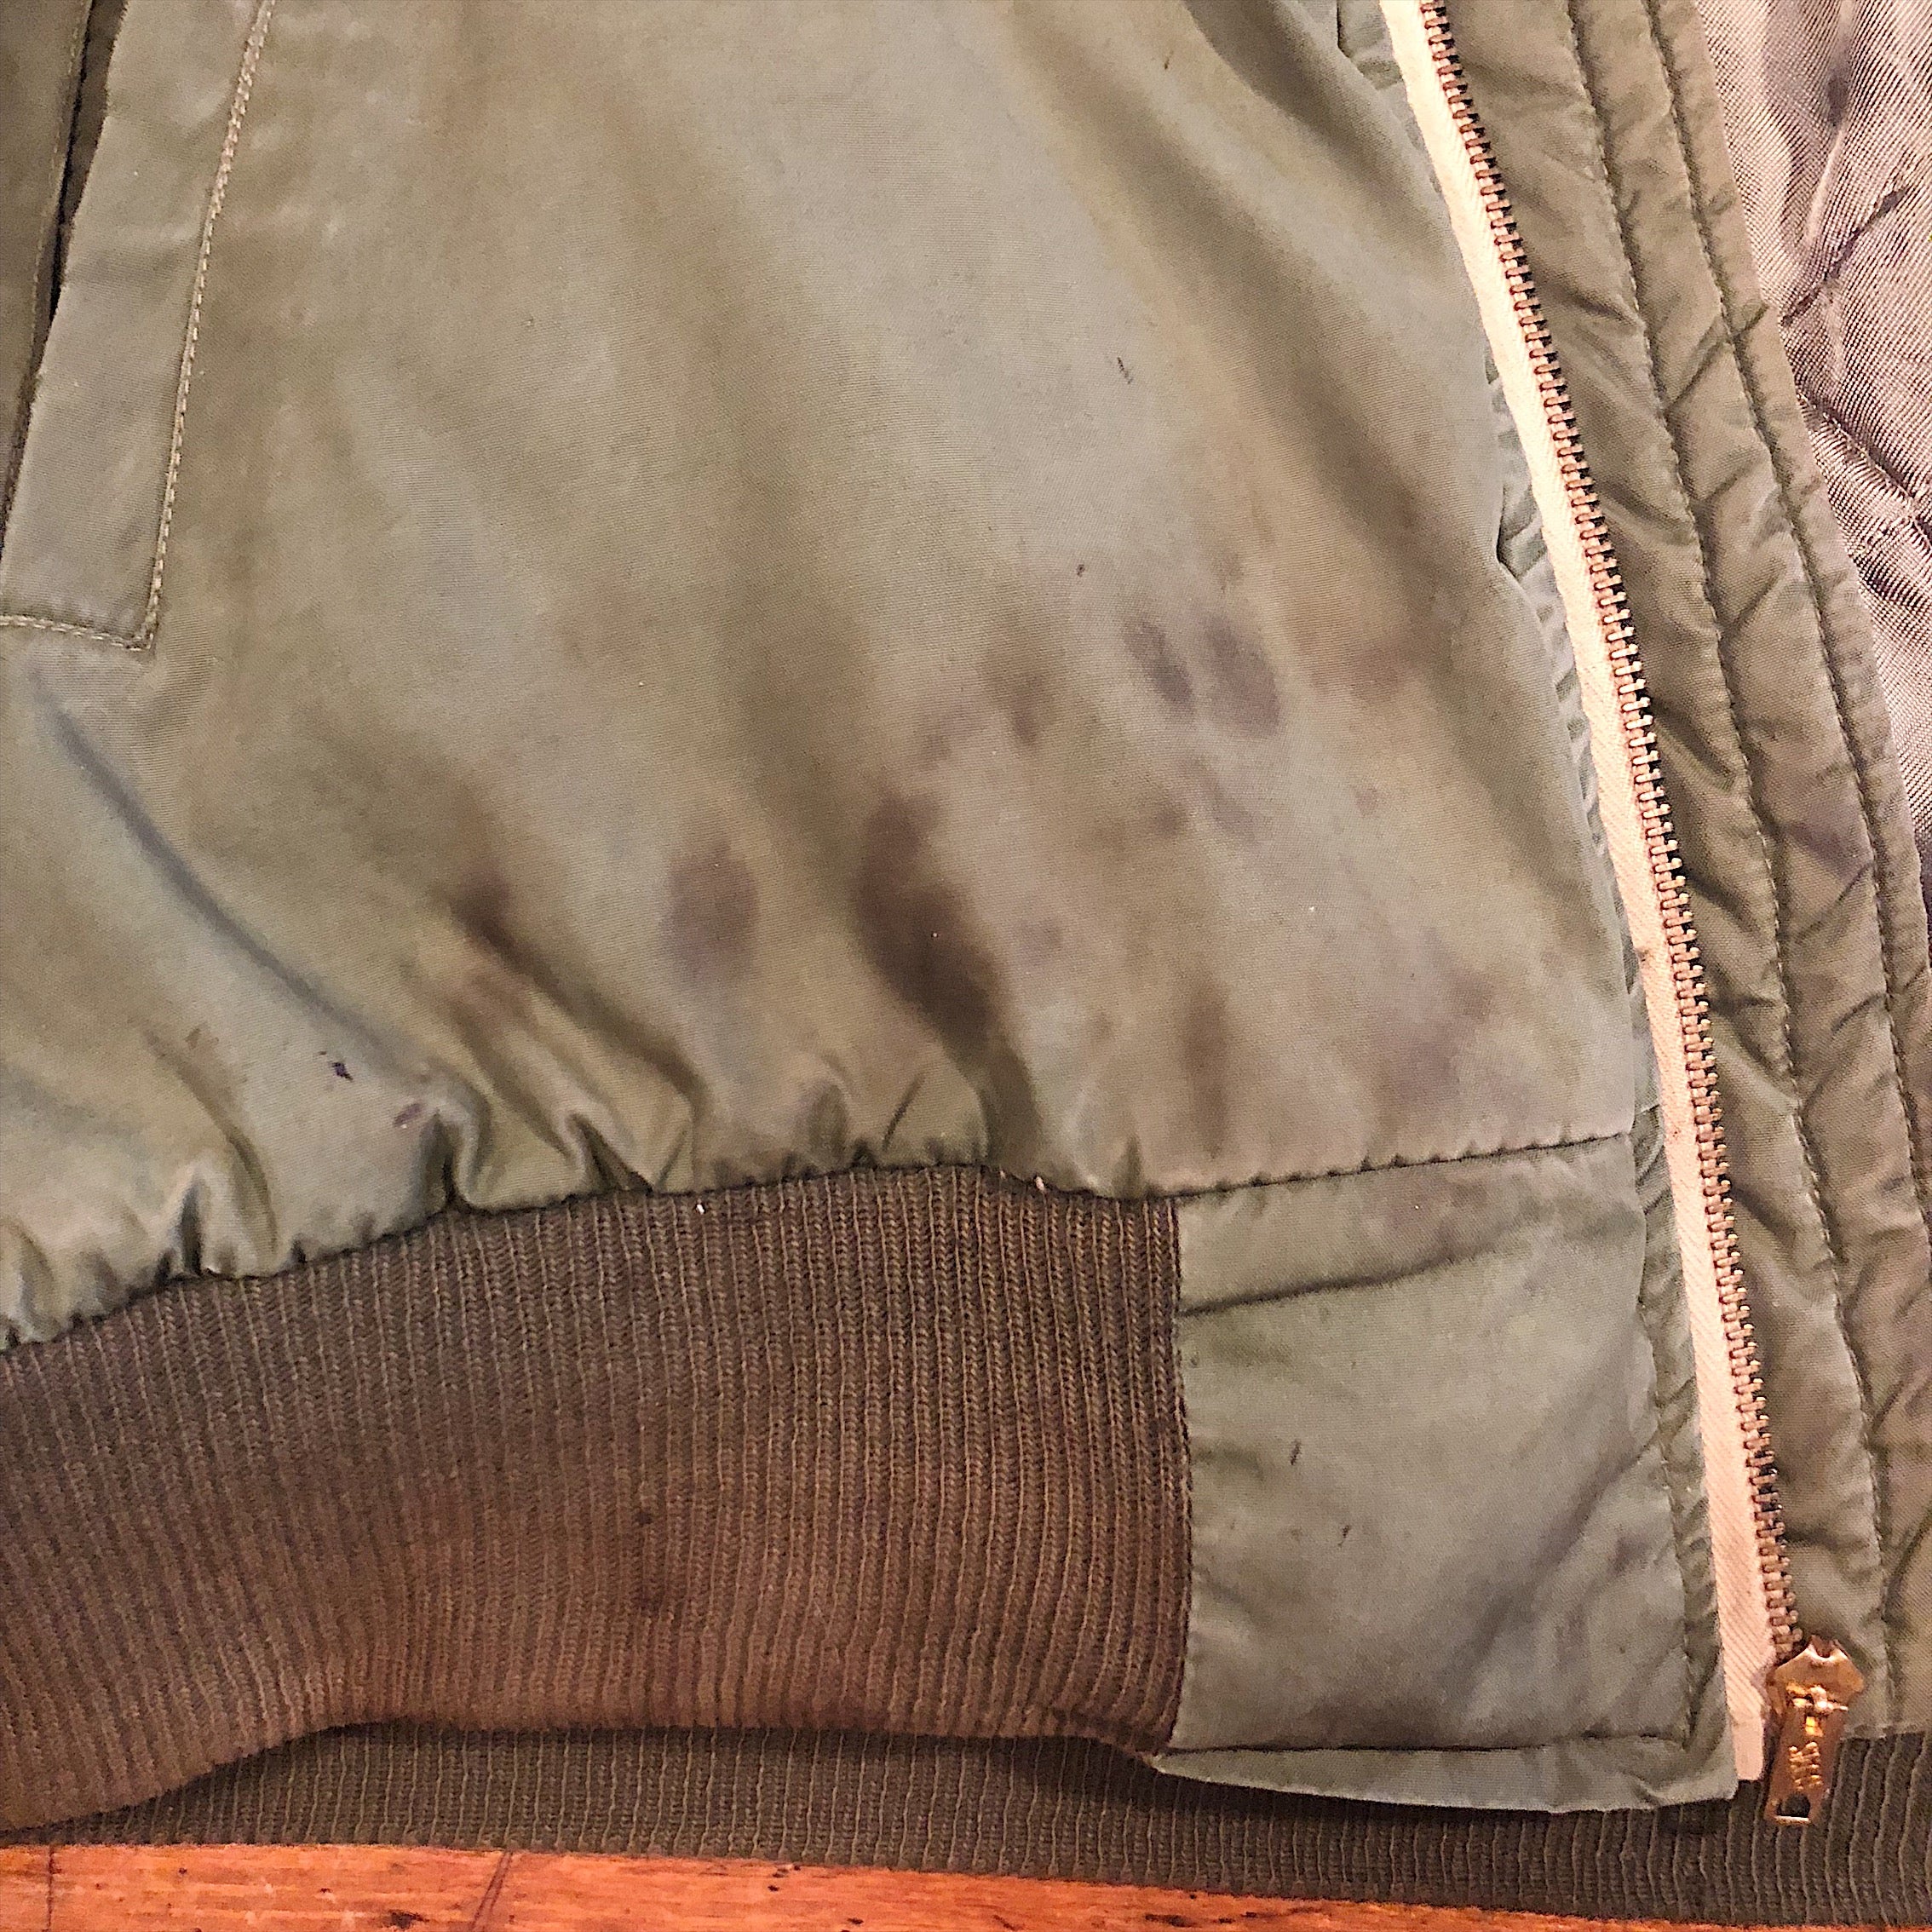 Oil Stains on Authentic WW2 Tanker Jacket 